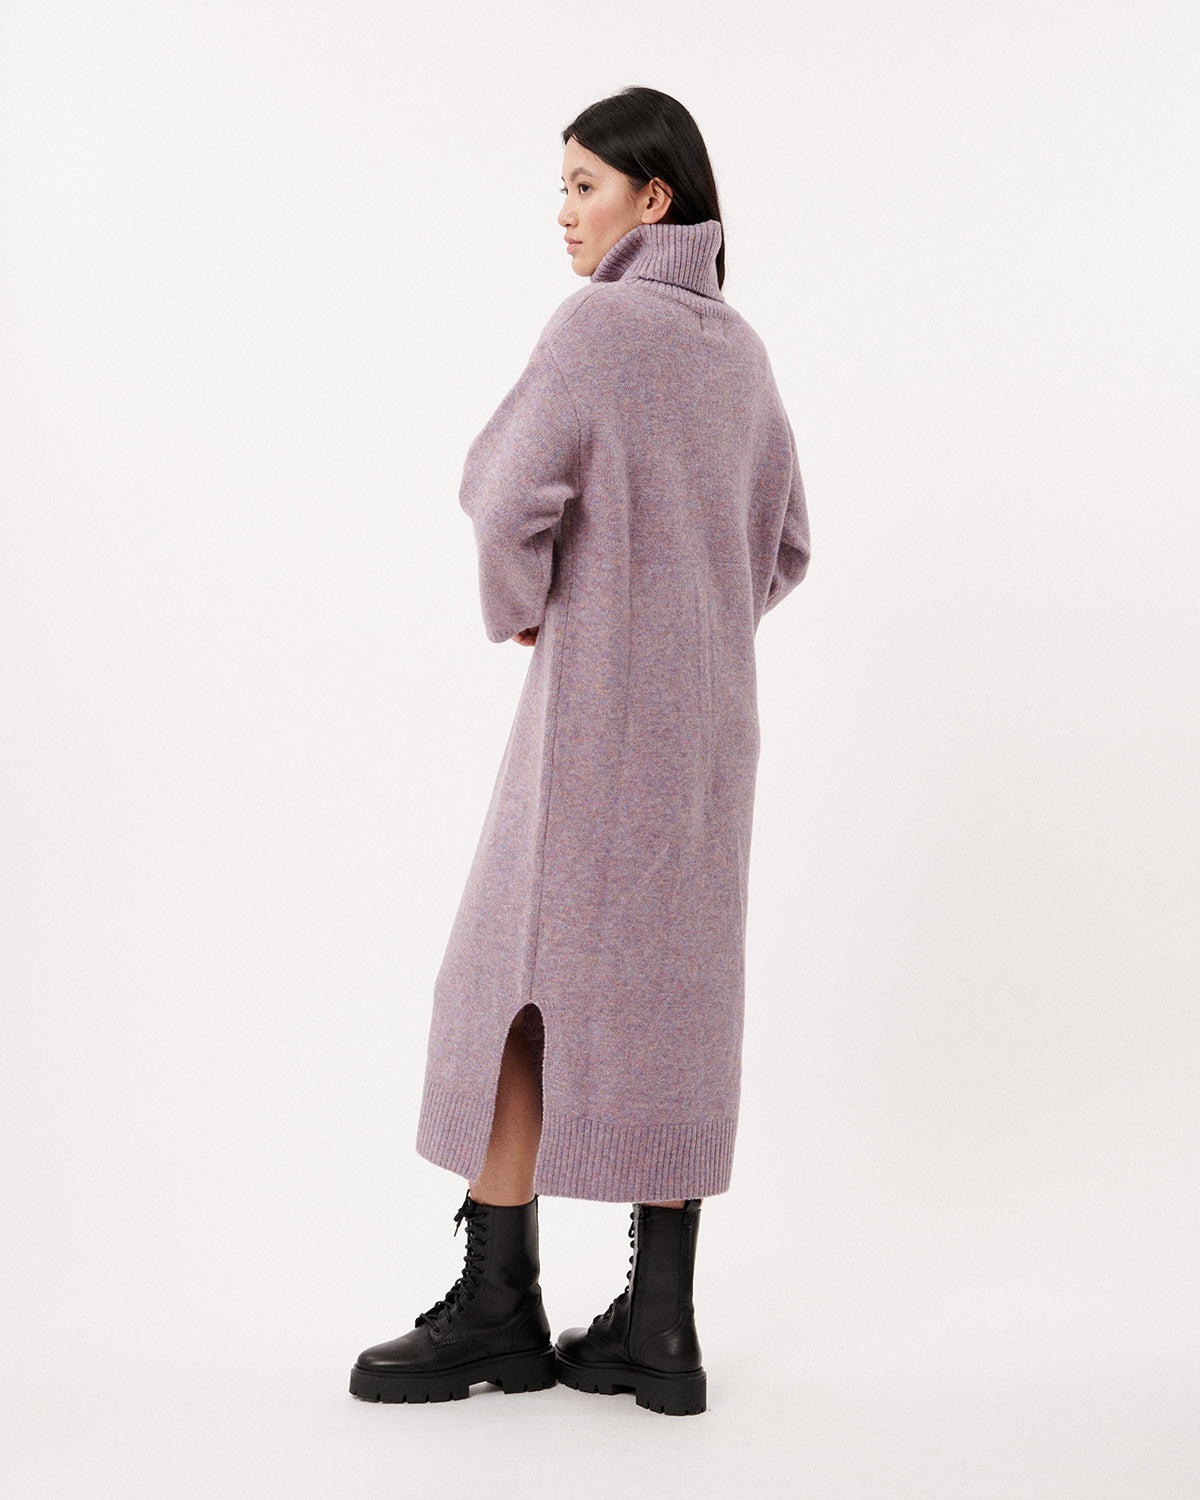 Frnch MS23-74 lilac knitted turtleneck dress